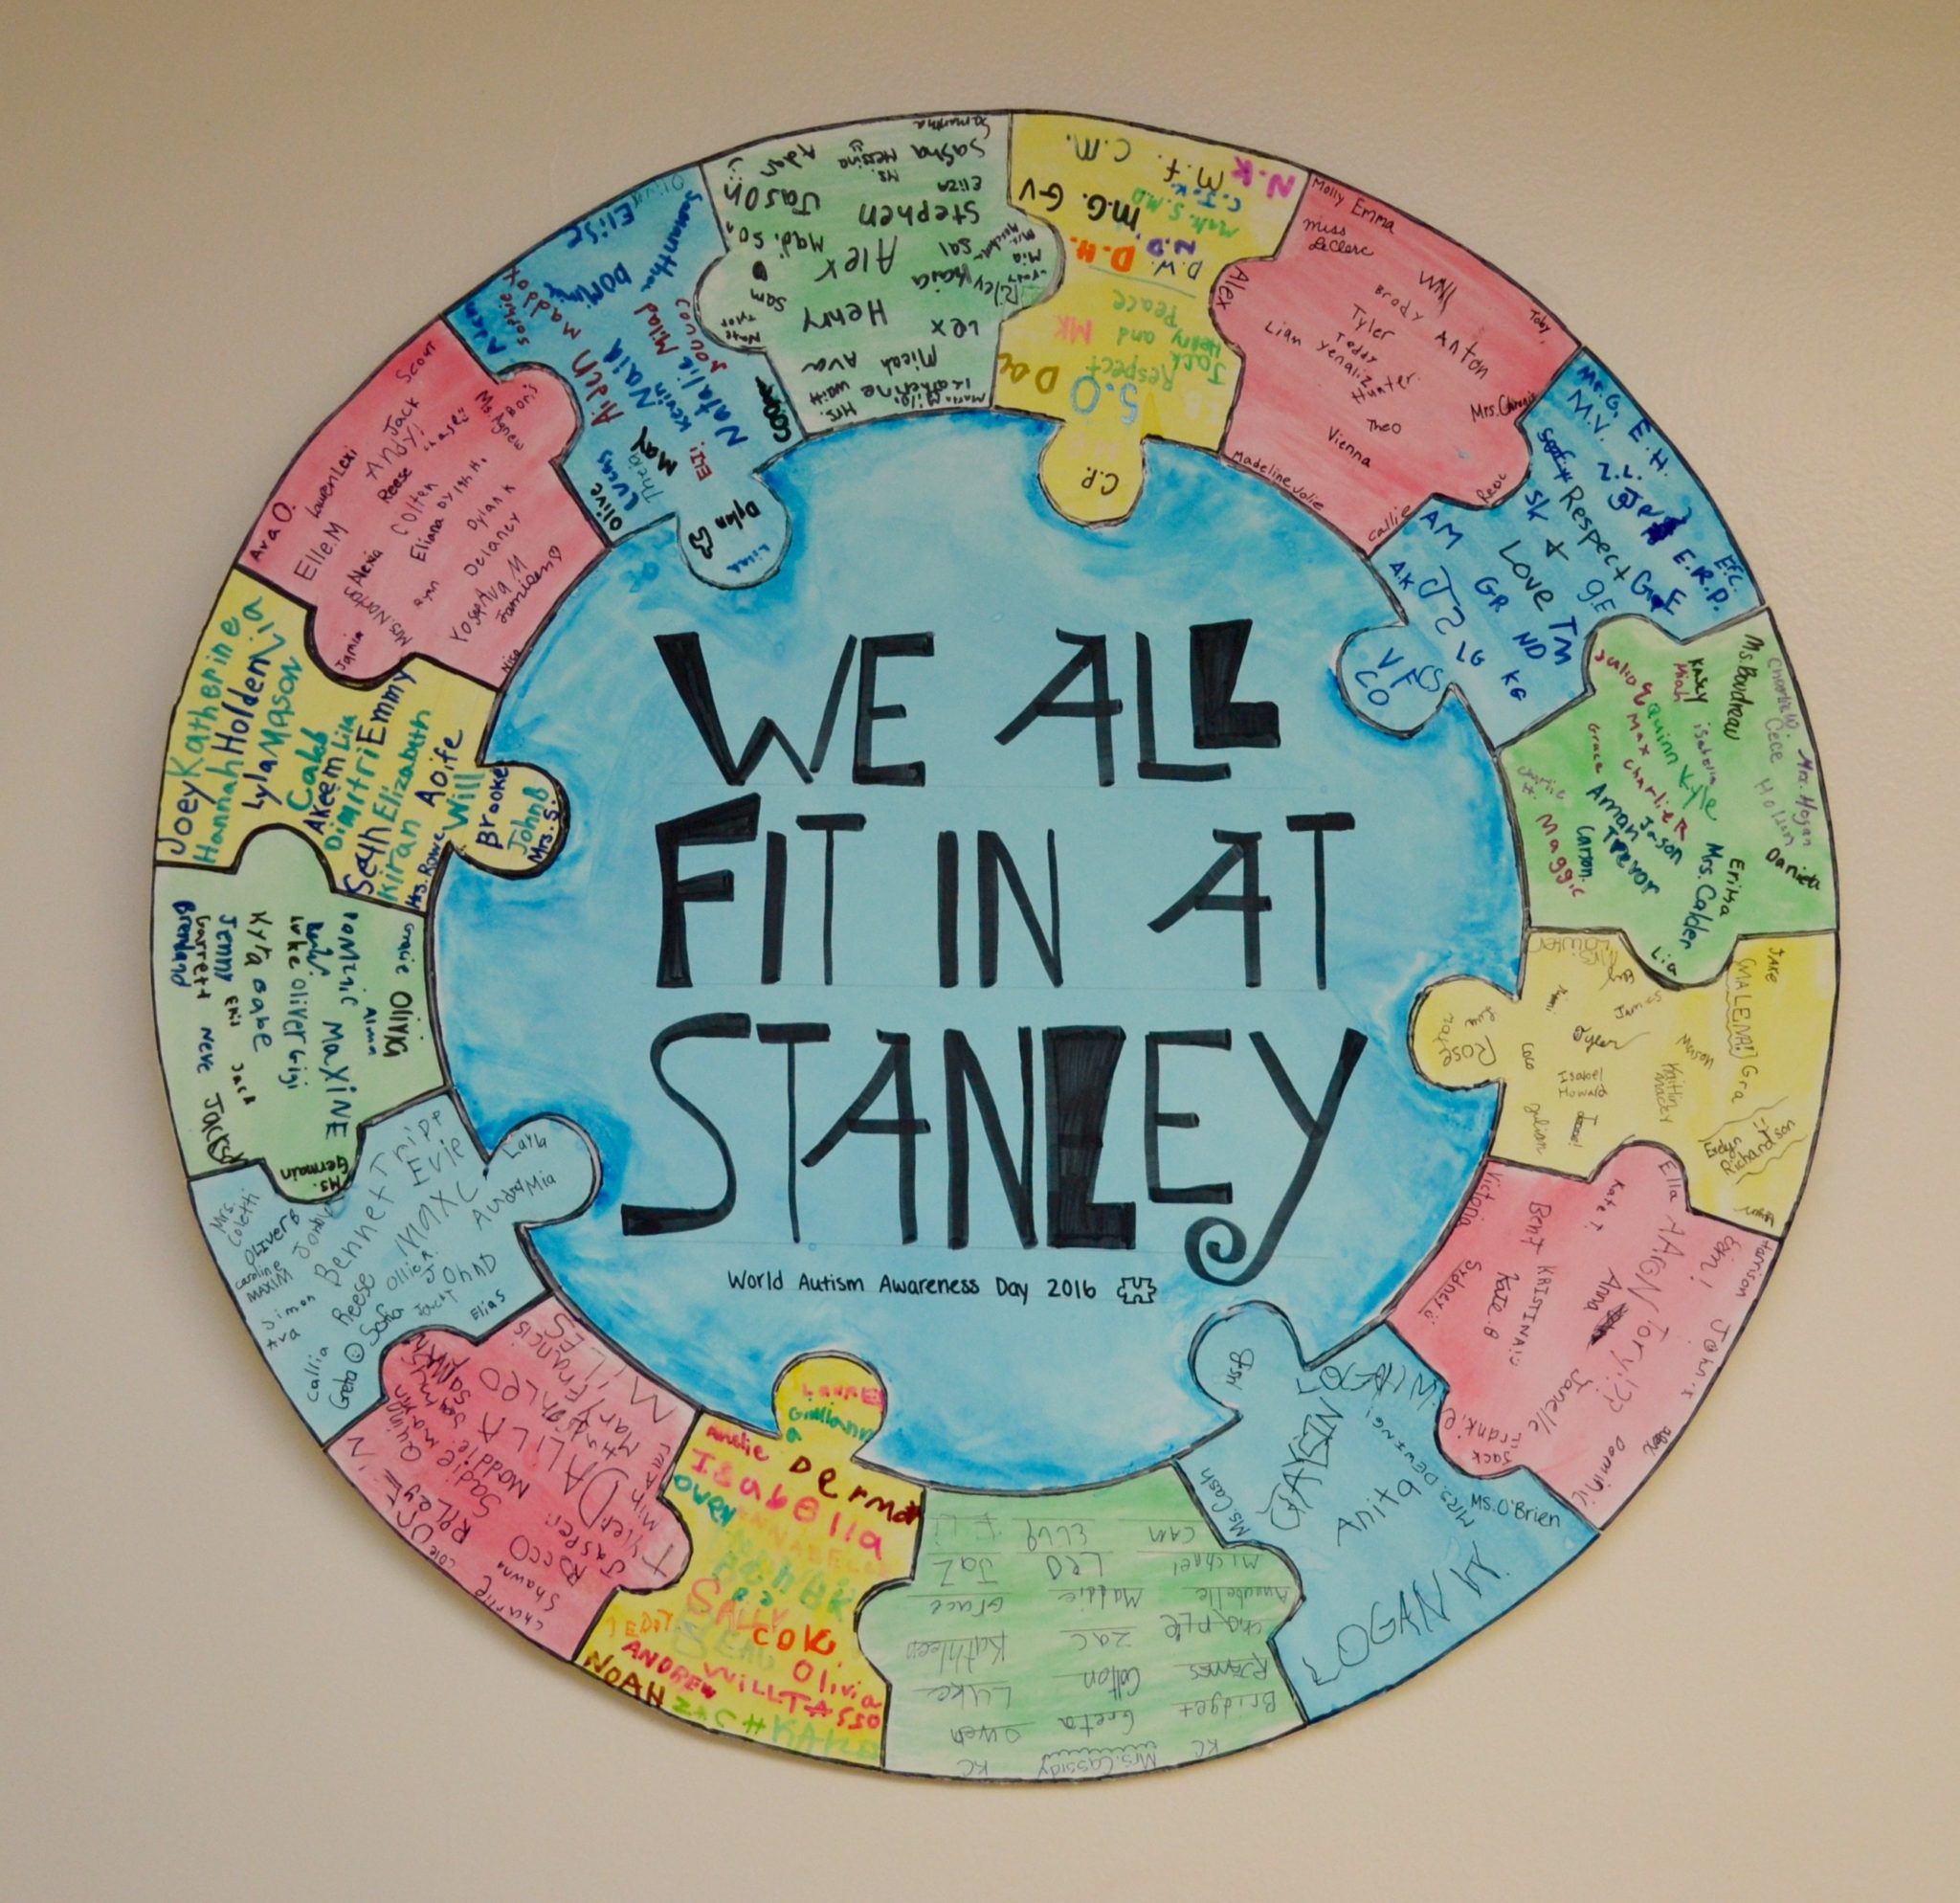 We all fit in at Stanley - world autism awareness day 2016 artwork